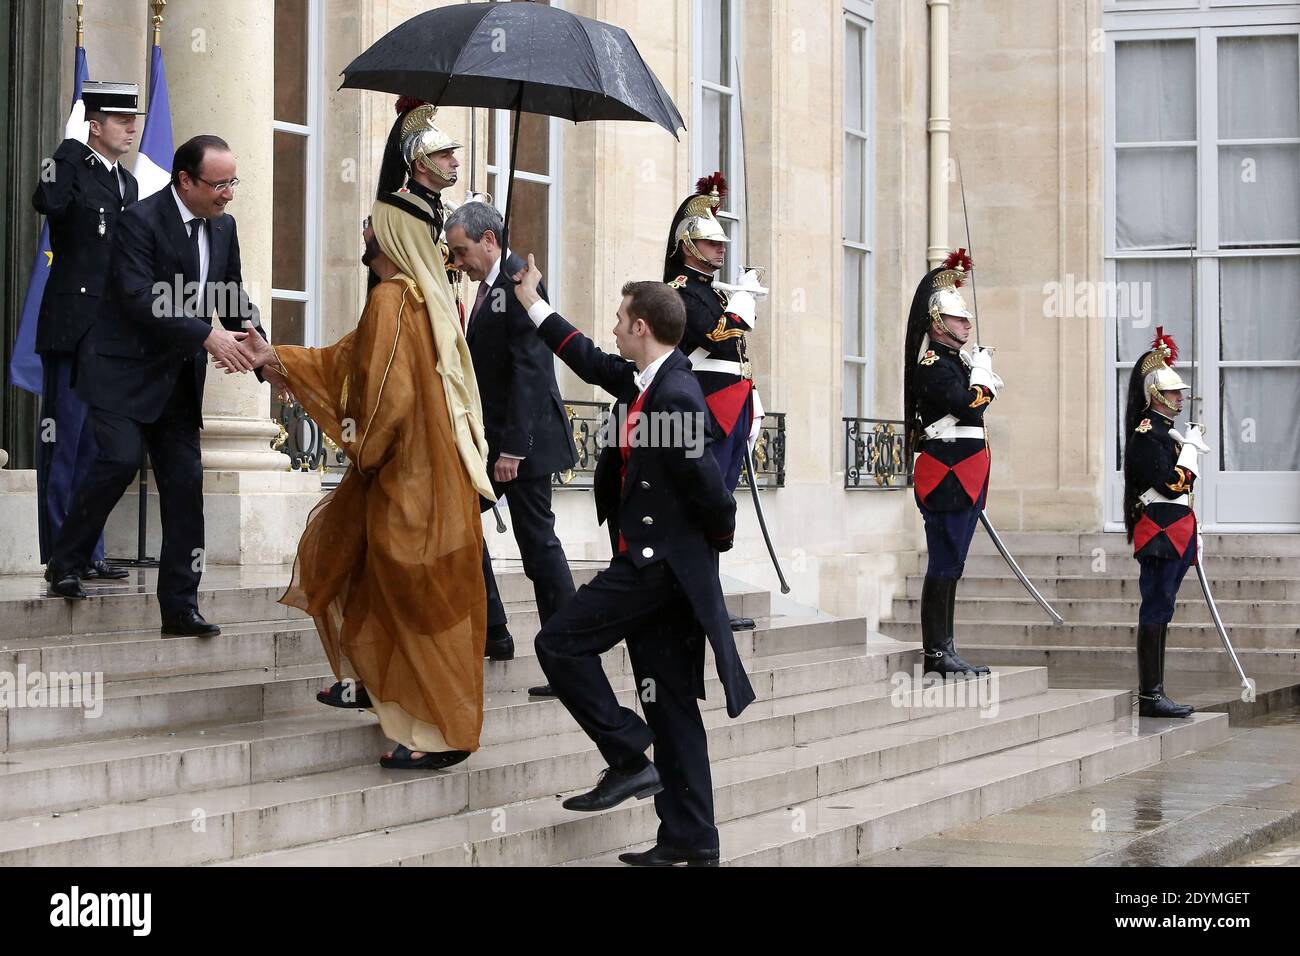 French President Francois Hollande shakes hands with Dubai ruler Sheikh Mohammed bin Rashid al-Maktoum prior to their meeting at the Elysee Palace, in Paris, France on June 13, 2013. Photo by Stephane Lemouton/ABACAPRESS.COM Stock Photo